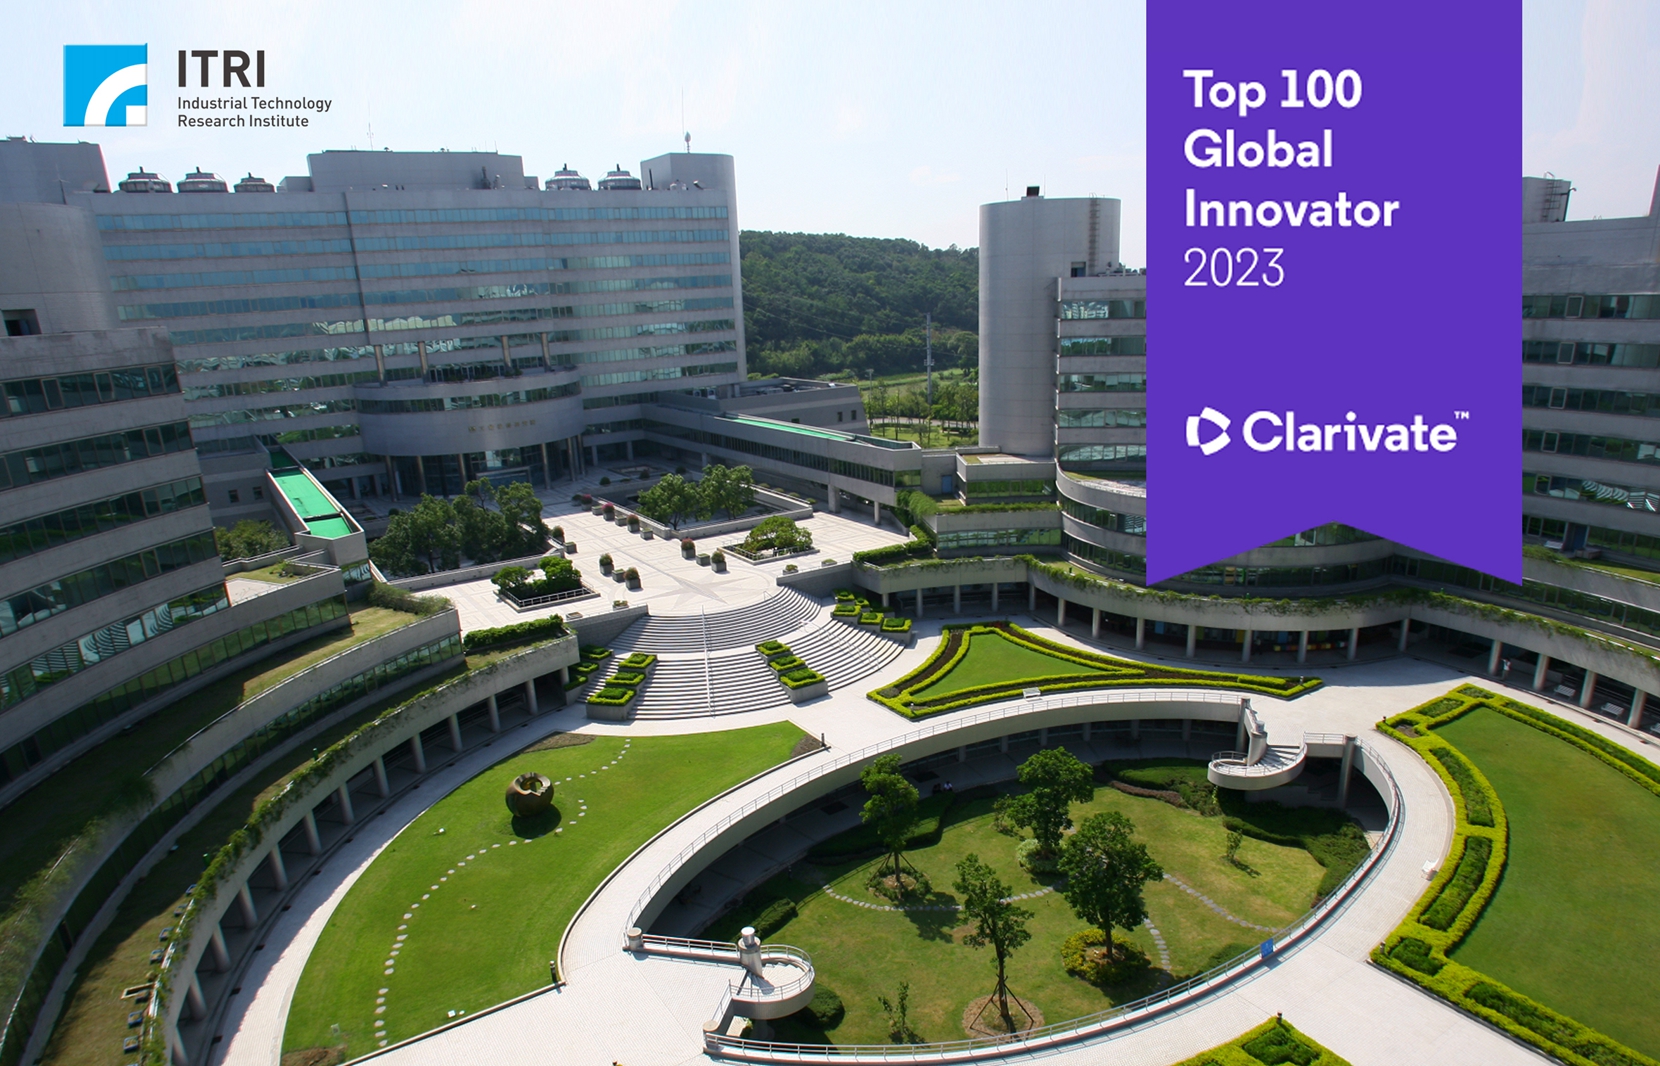 ITRI Recognized as Top 100 Global Innovator 2023